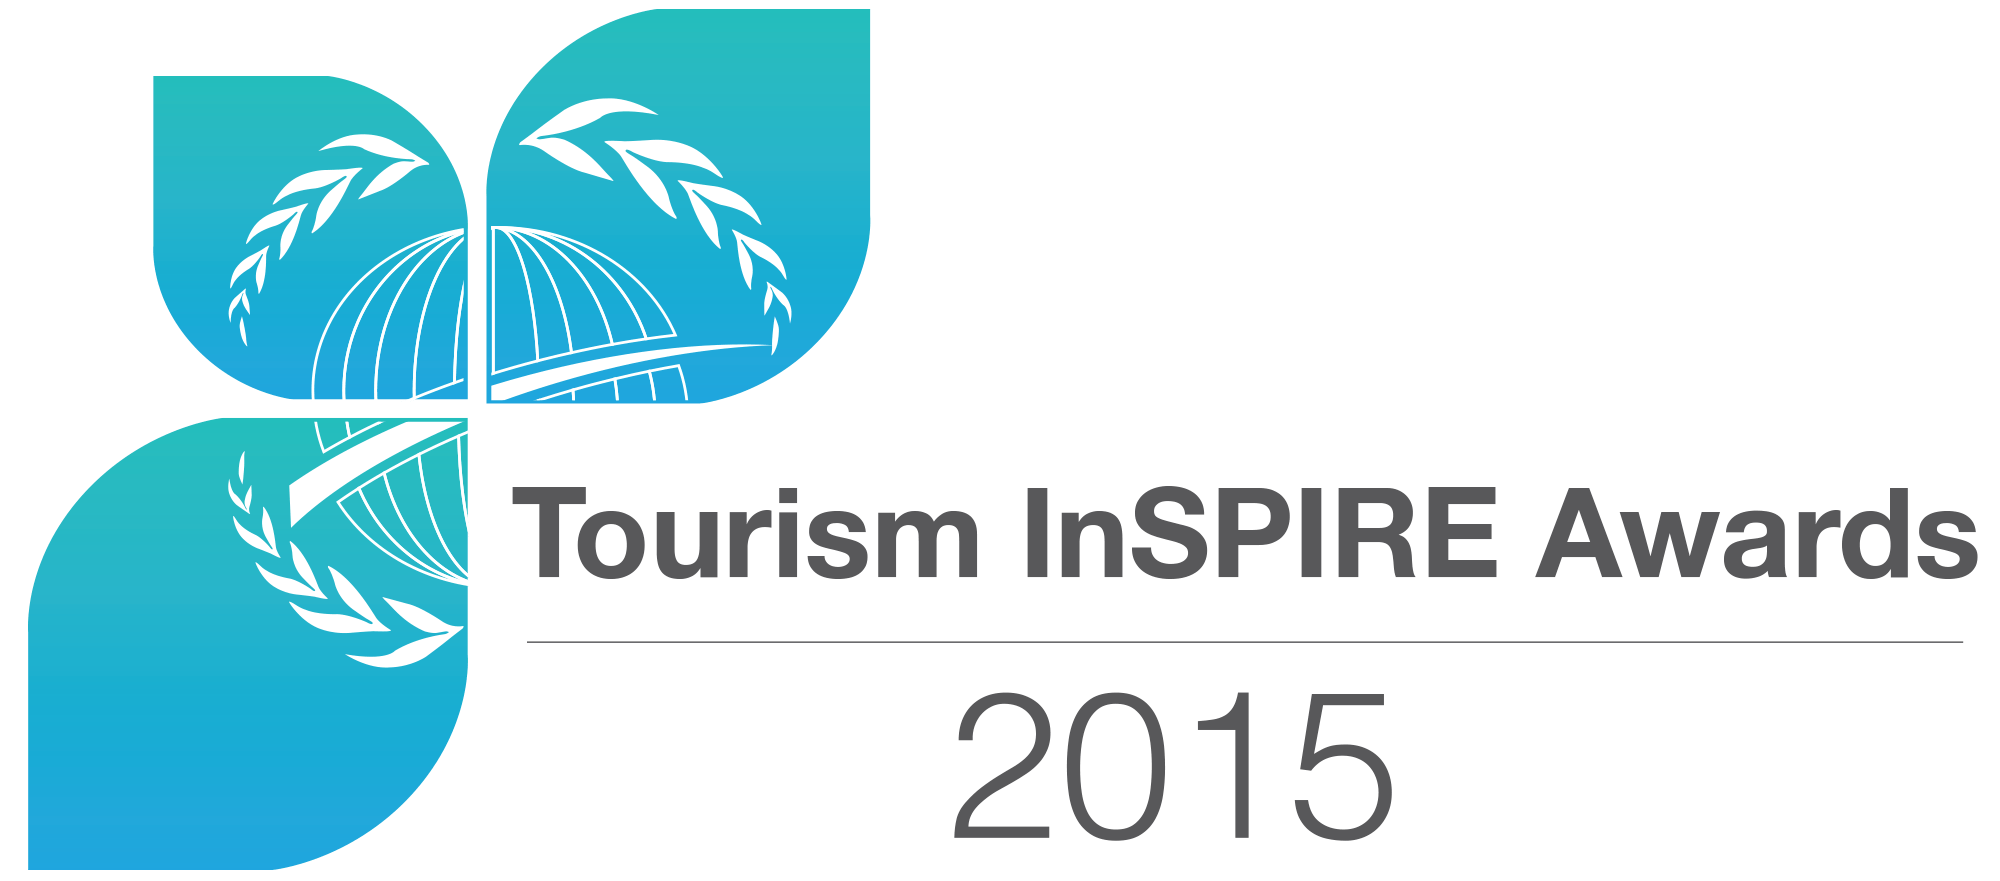 Pata Logo - PATA launches Tourism InSPIRE Awards 2015. Global Sustainable